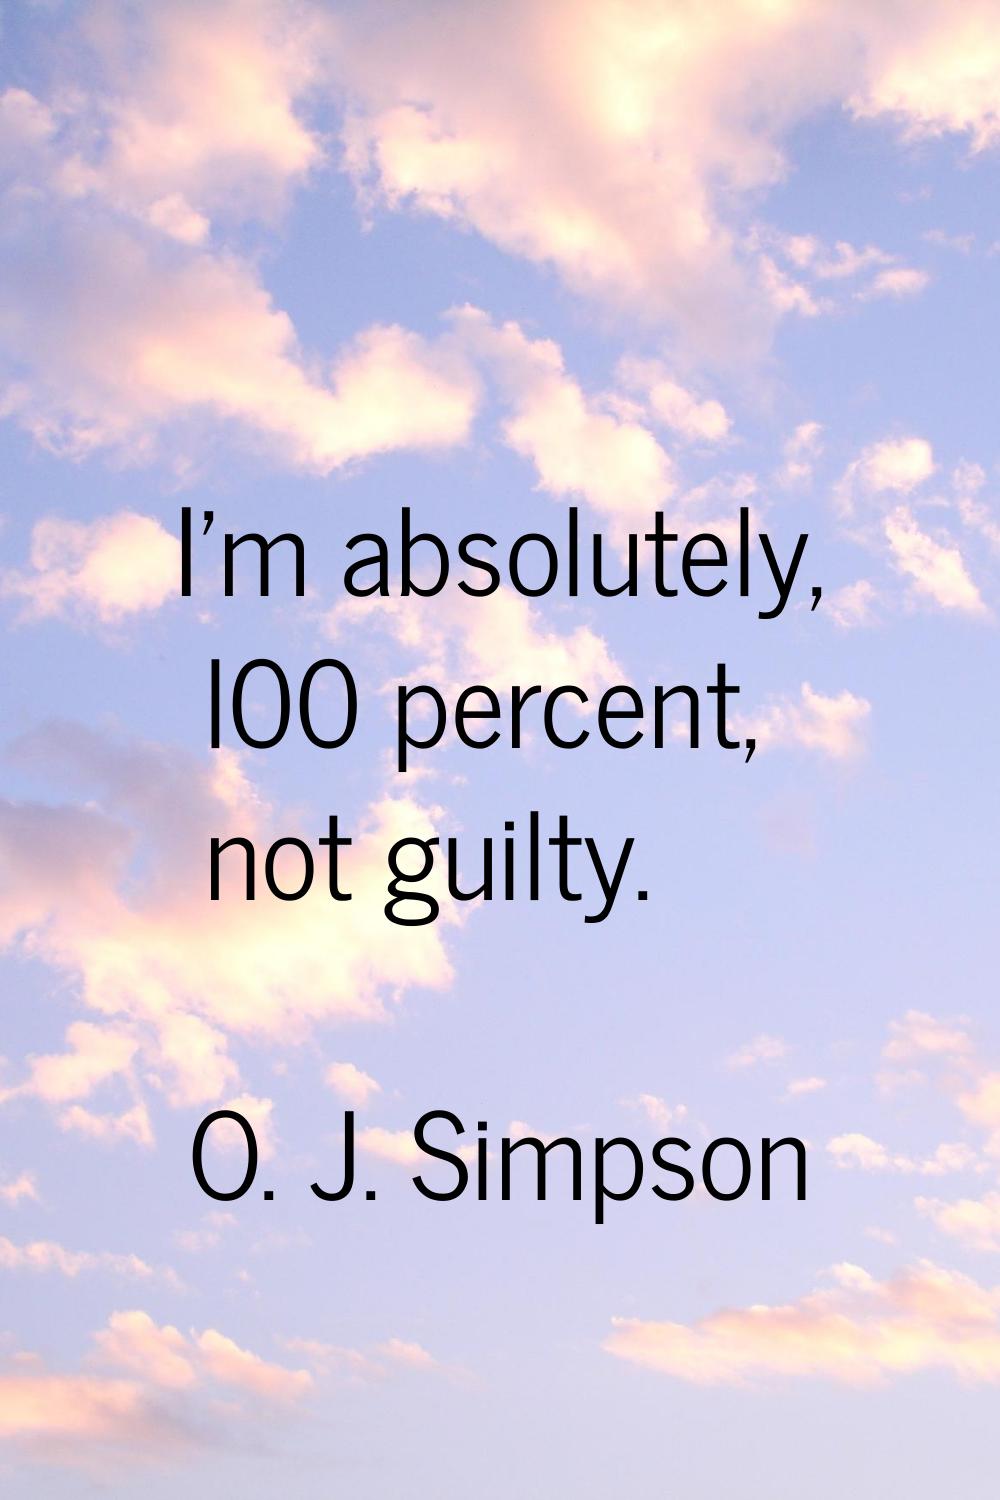 I'm absolutely, l00 percent, not guilty.